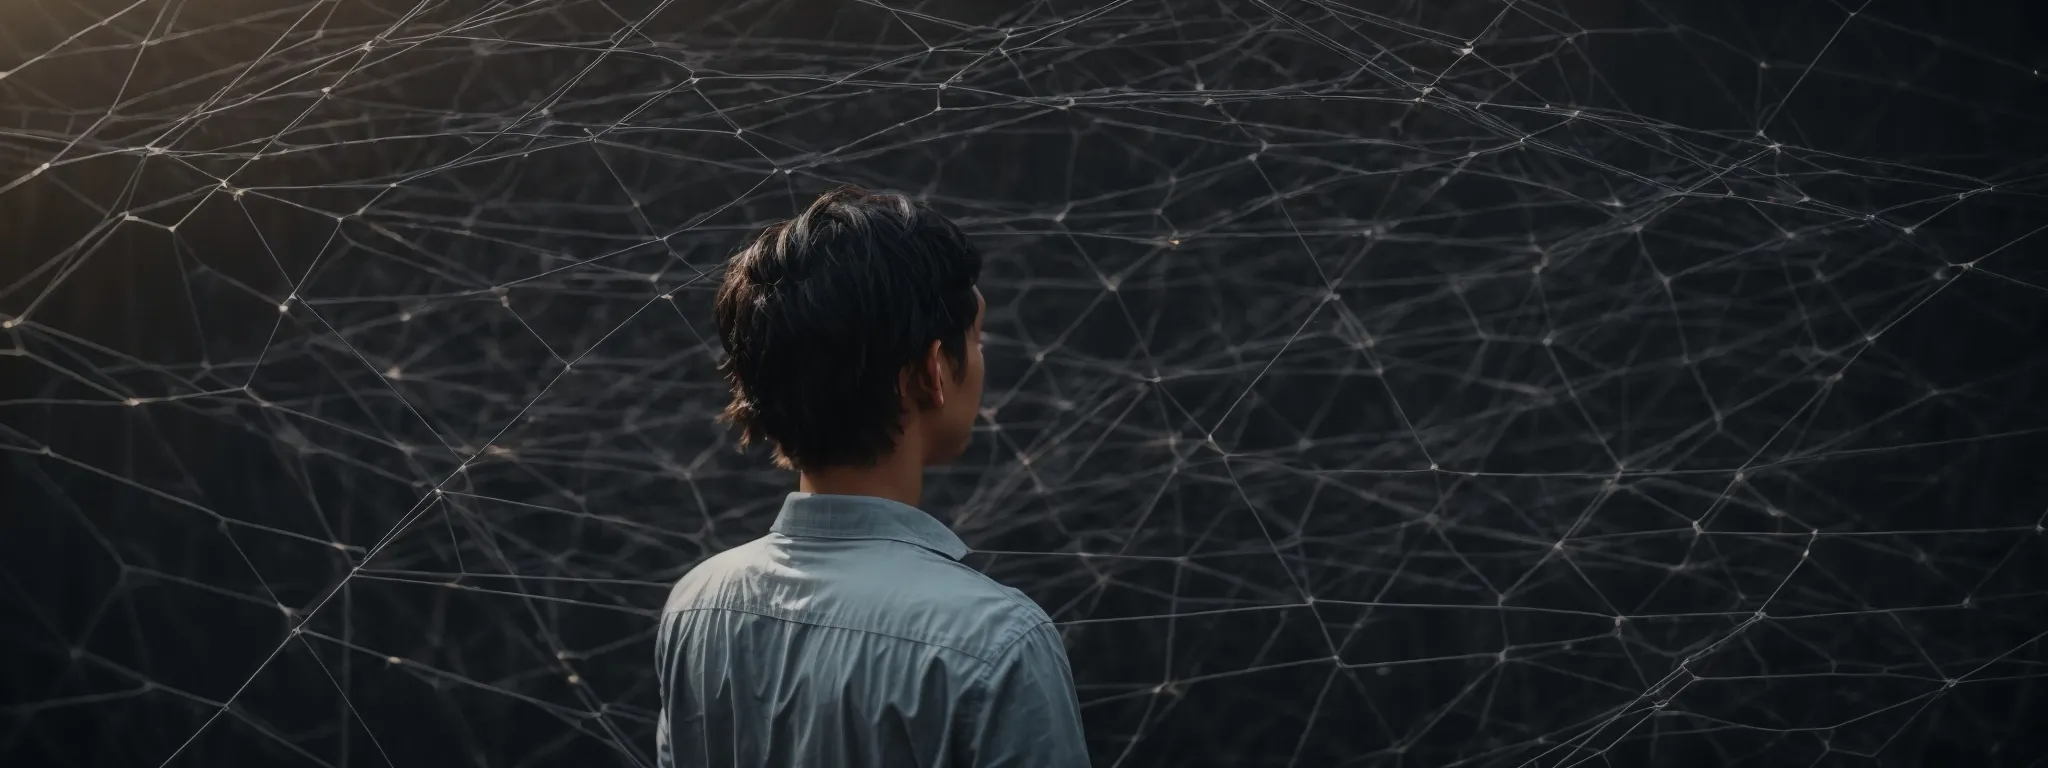 a digital marketer demonstrates a labyrinthine web of interconnected nodes symbolizing a website's structured internal linking system.